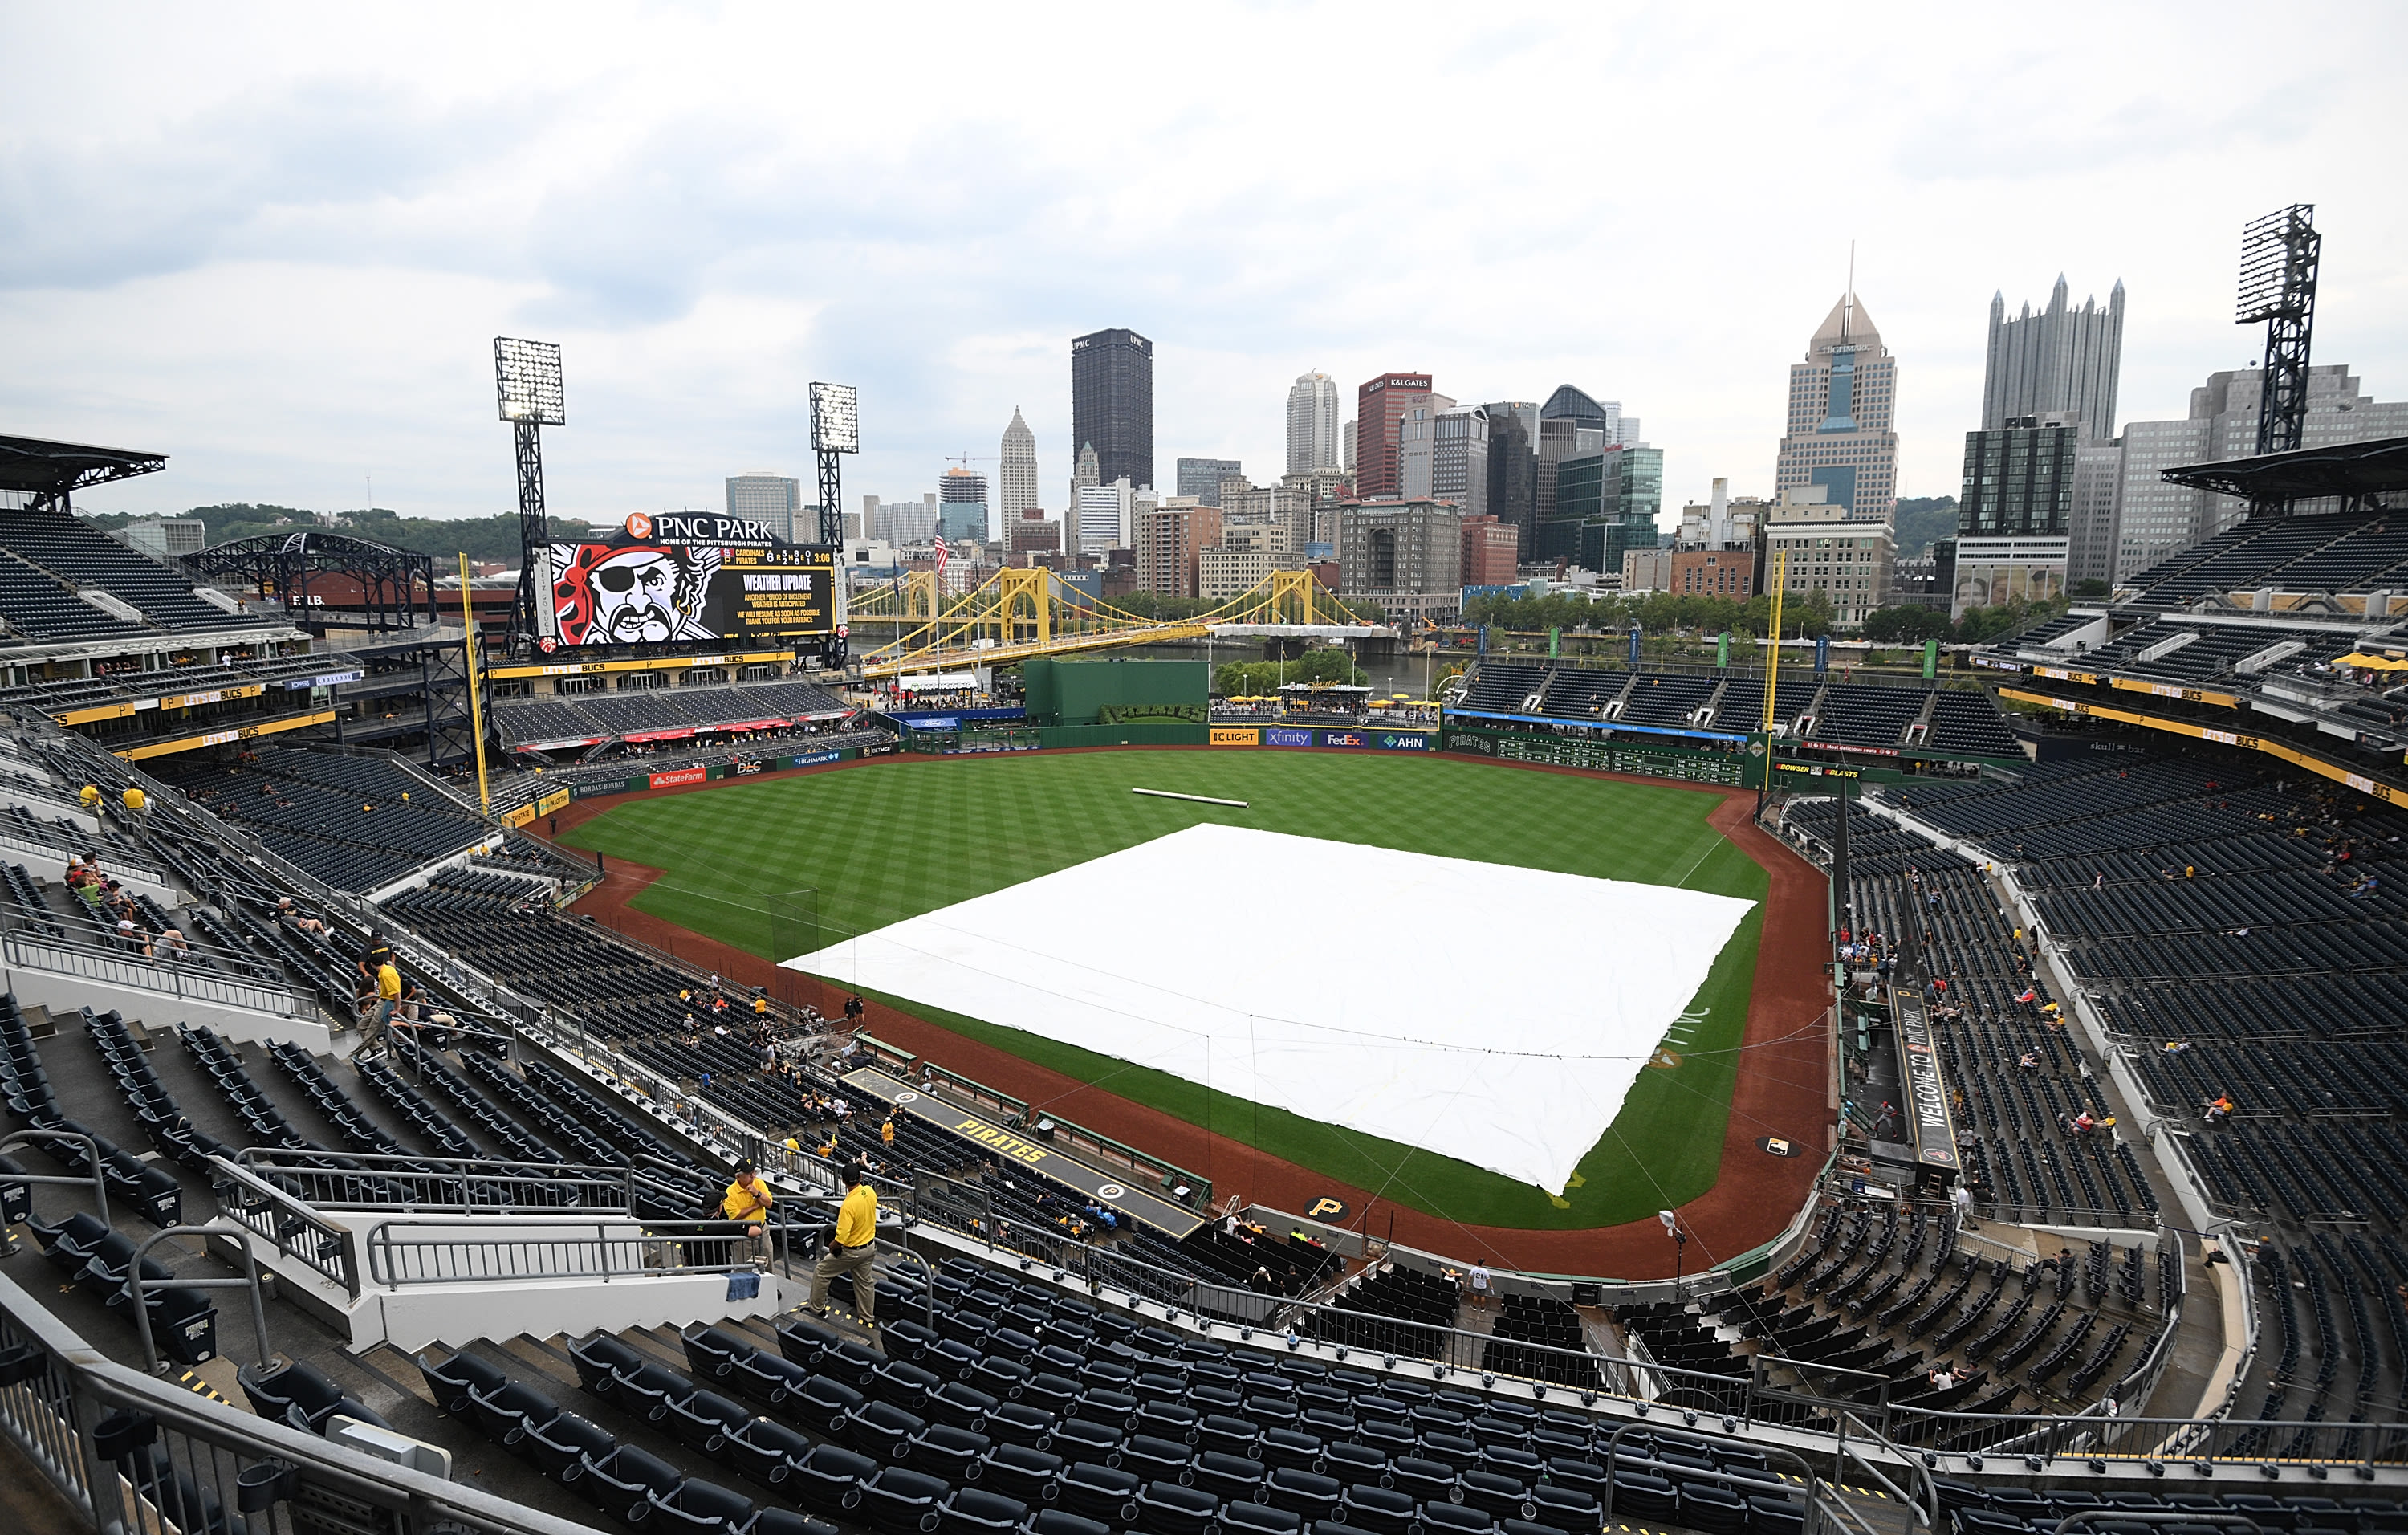 Saturday's Cubs-Pirates game goes into a rain delay after a wild sequence